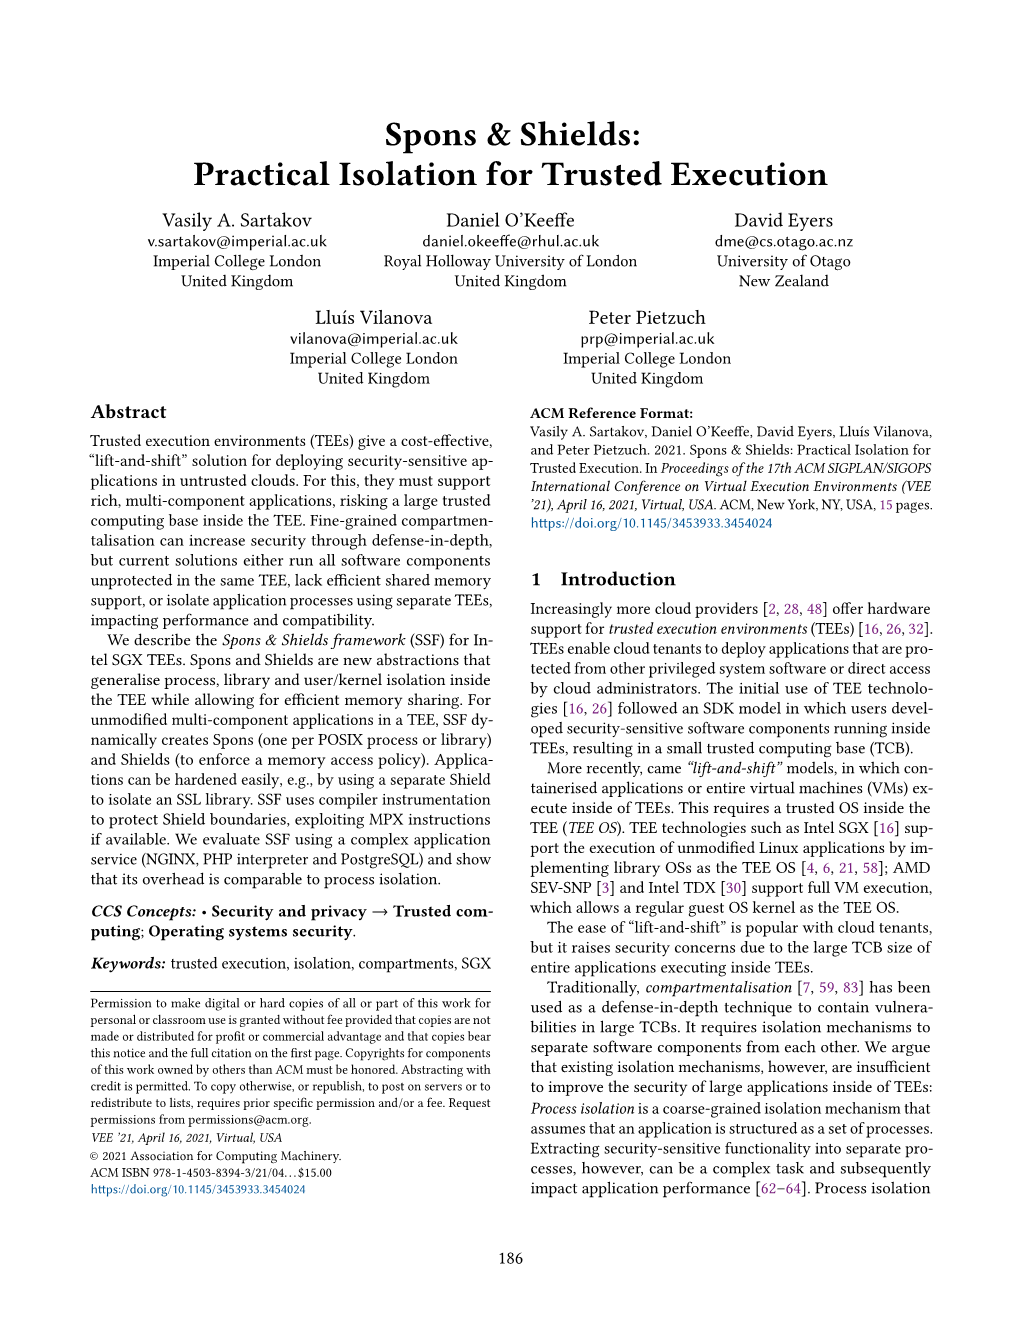 Spons & Shields: Practical Isolation for Trusted Execution